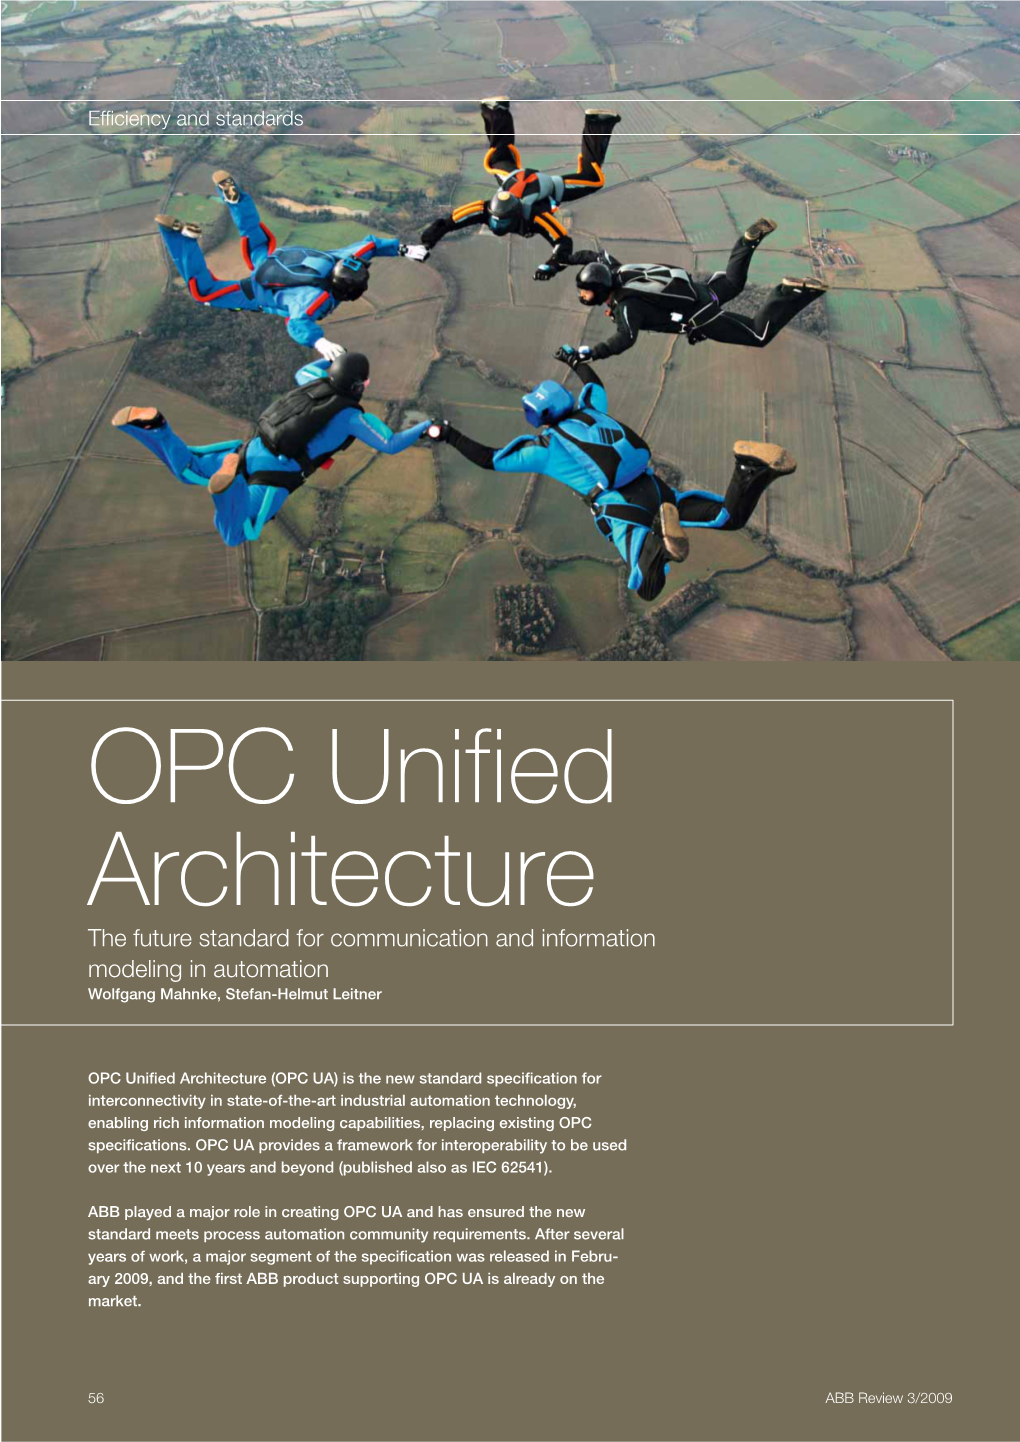 OPC Unified Architecture the Future Standard for Communication and Information Modeling in Automation Wolfgang Mahnke, Stefan-Helmut Leitner